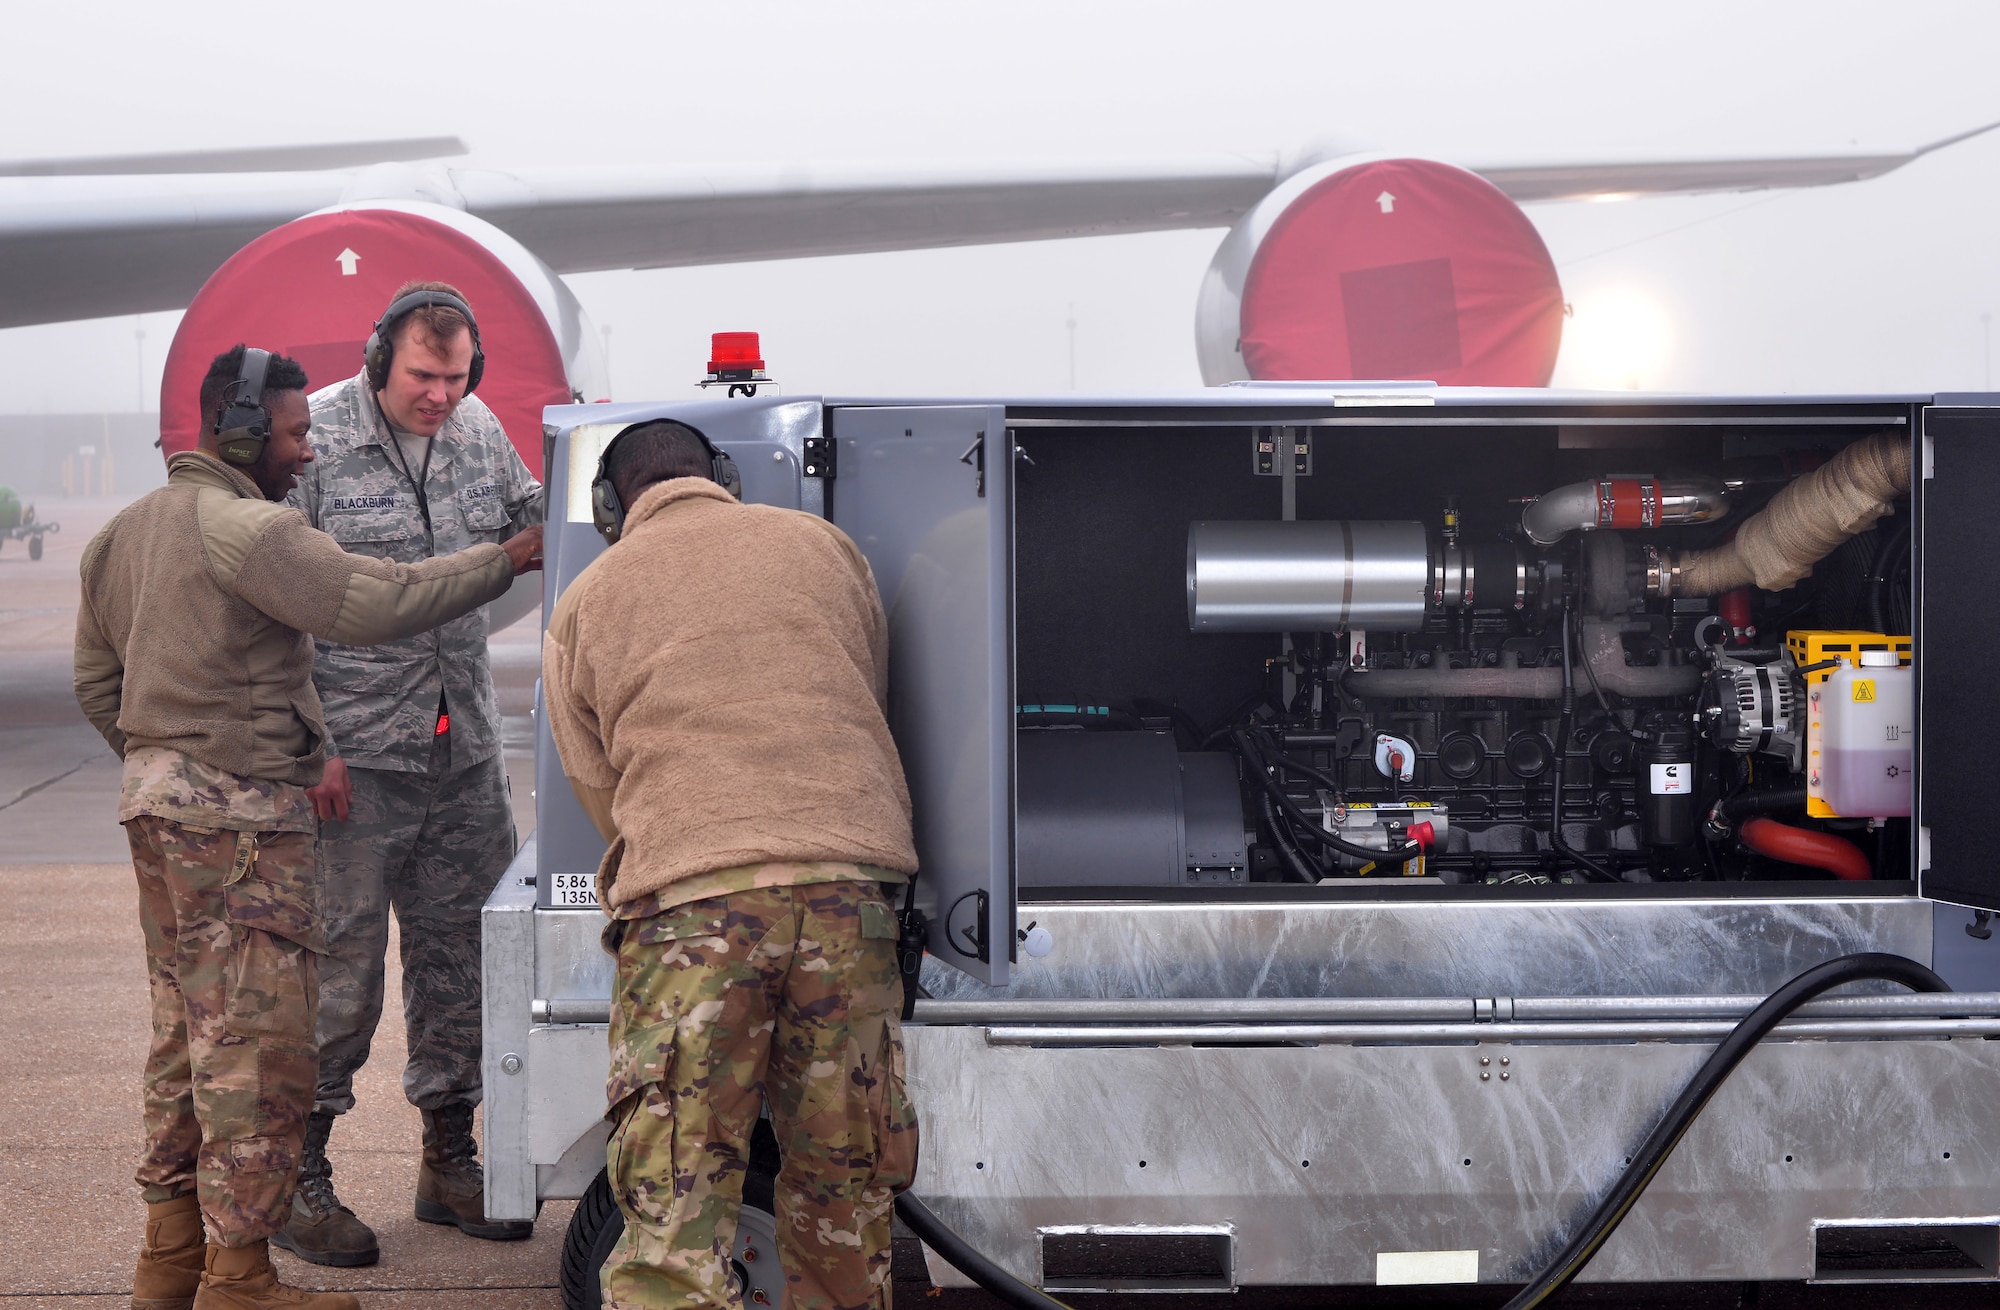 Staff Sgt. David Blackburn, 55th Maintenance Squadron aerospace ground equipment (AGE) journeyman, center, and other AGE personnel, look over recently acquired generators on Offutt AFB, Nebraska. (U.S. Air Force photo by D.P. Heard)